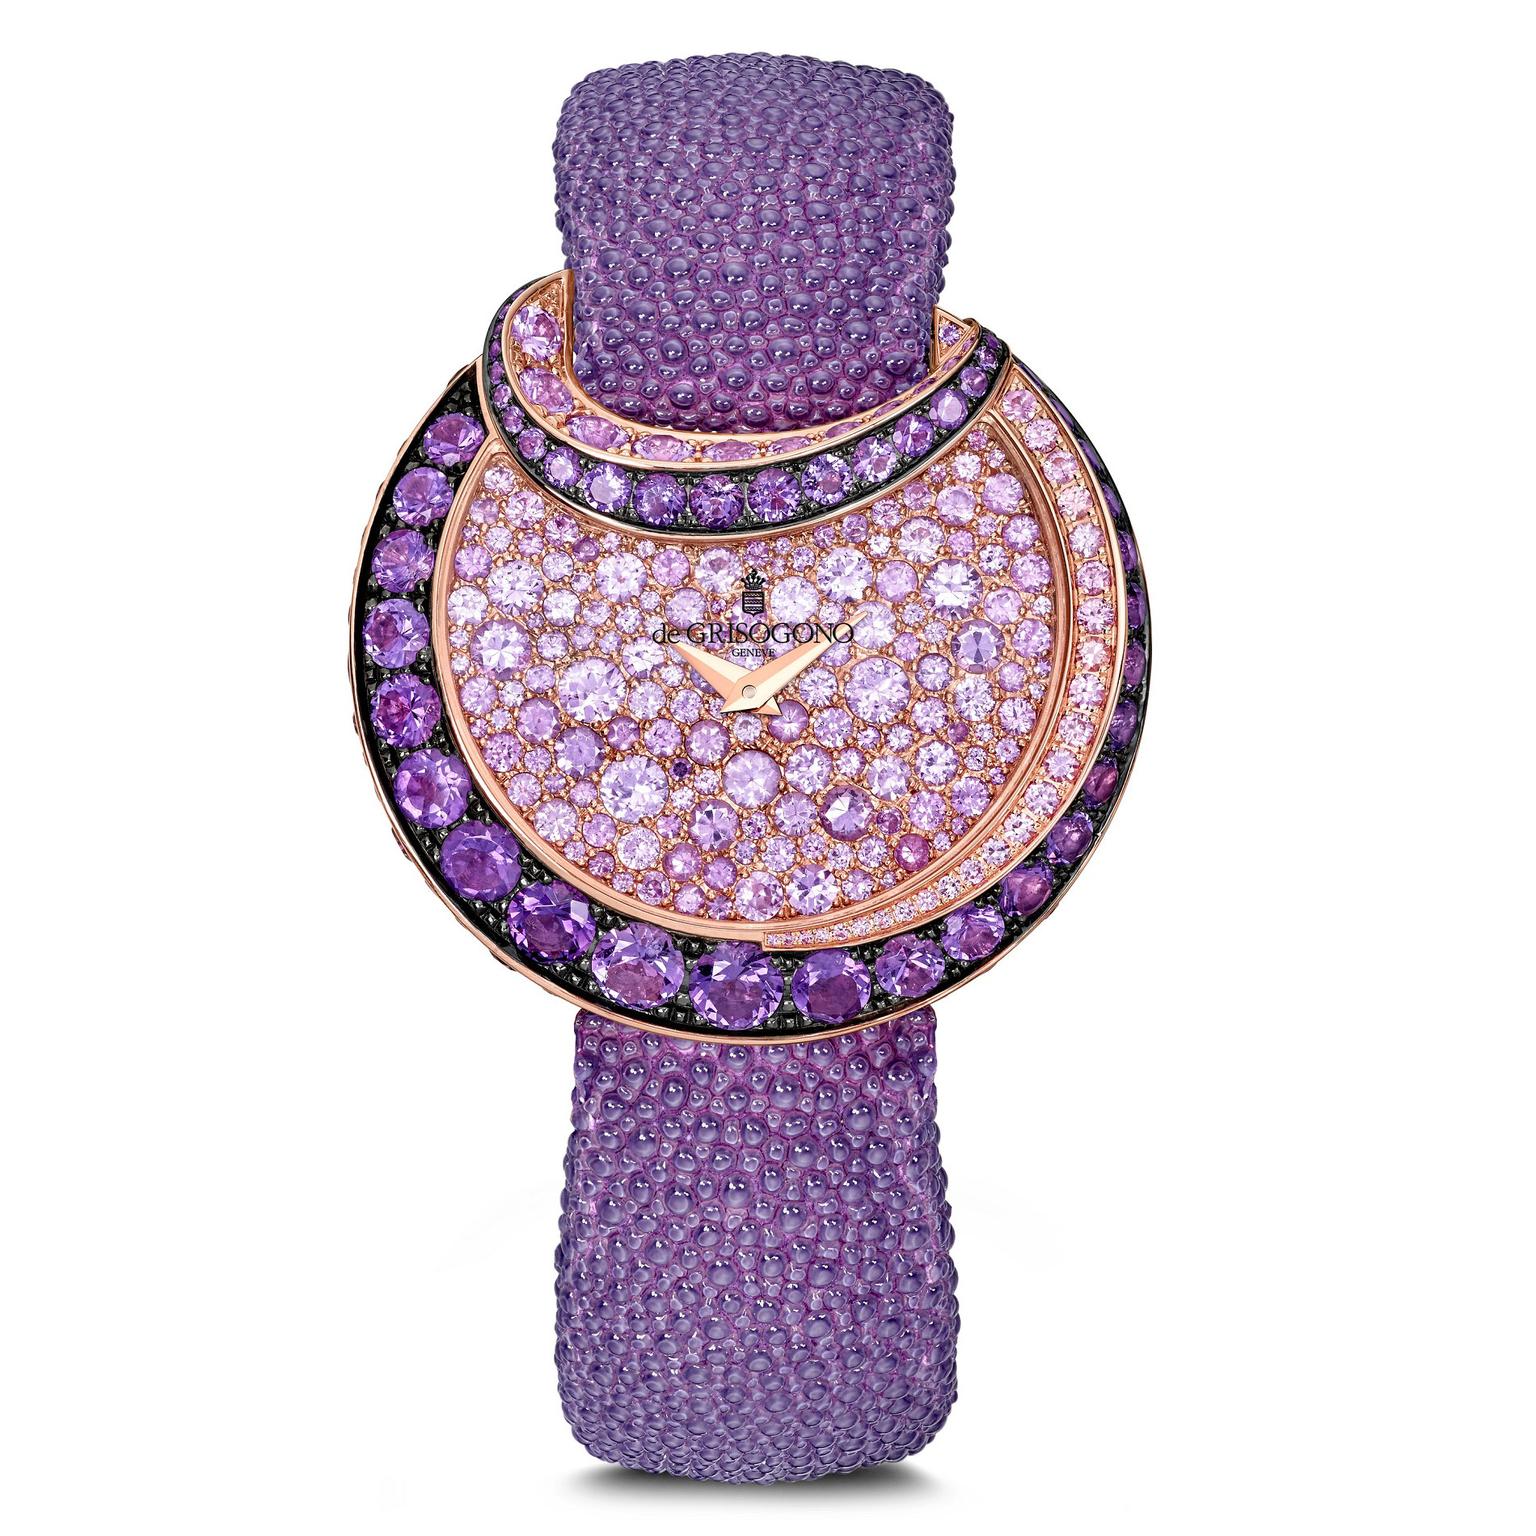 de GRISOGONO Luna watch with amethysts and pink sapphires